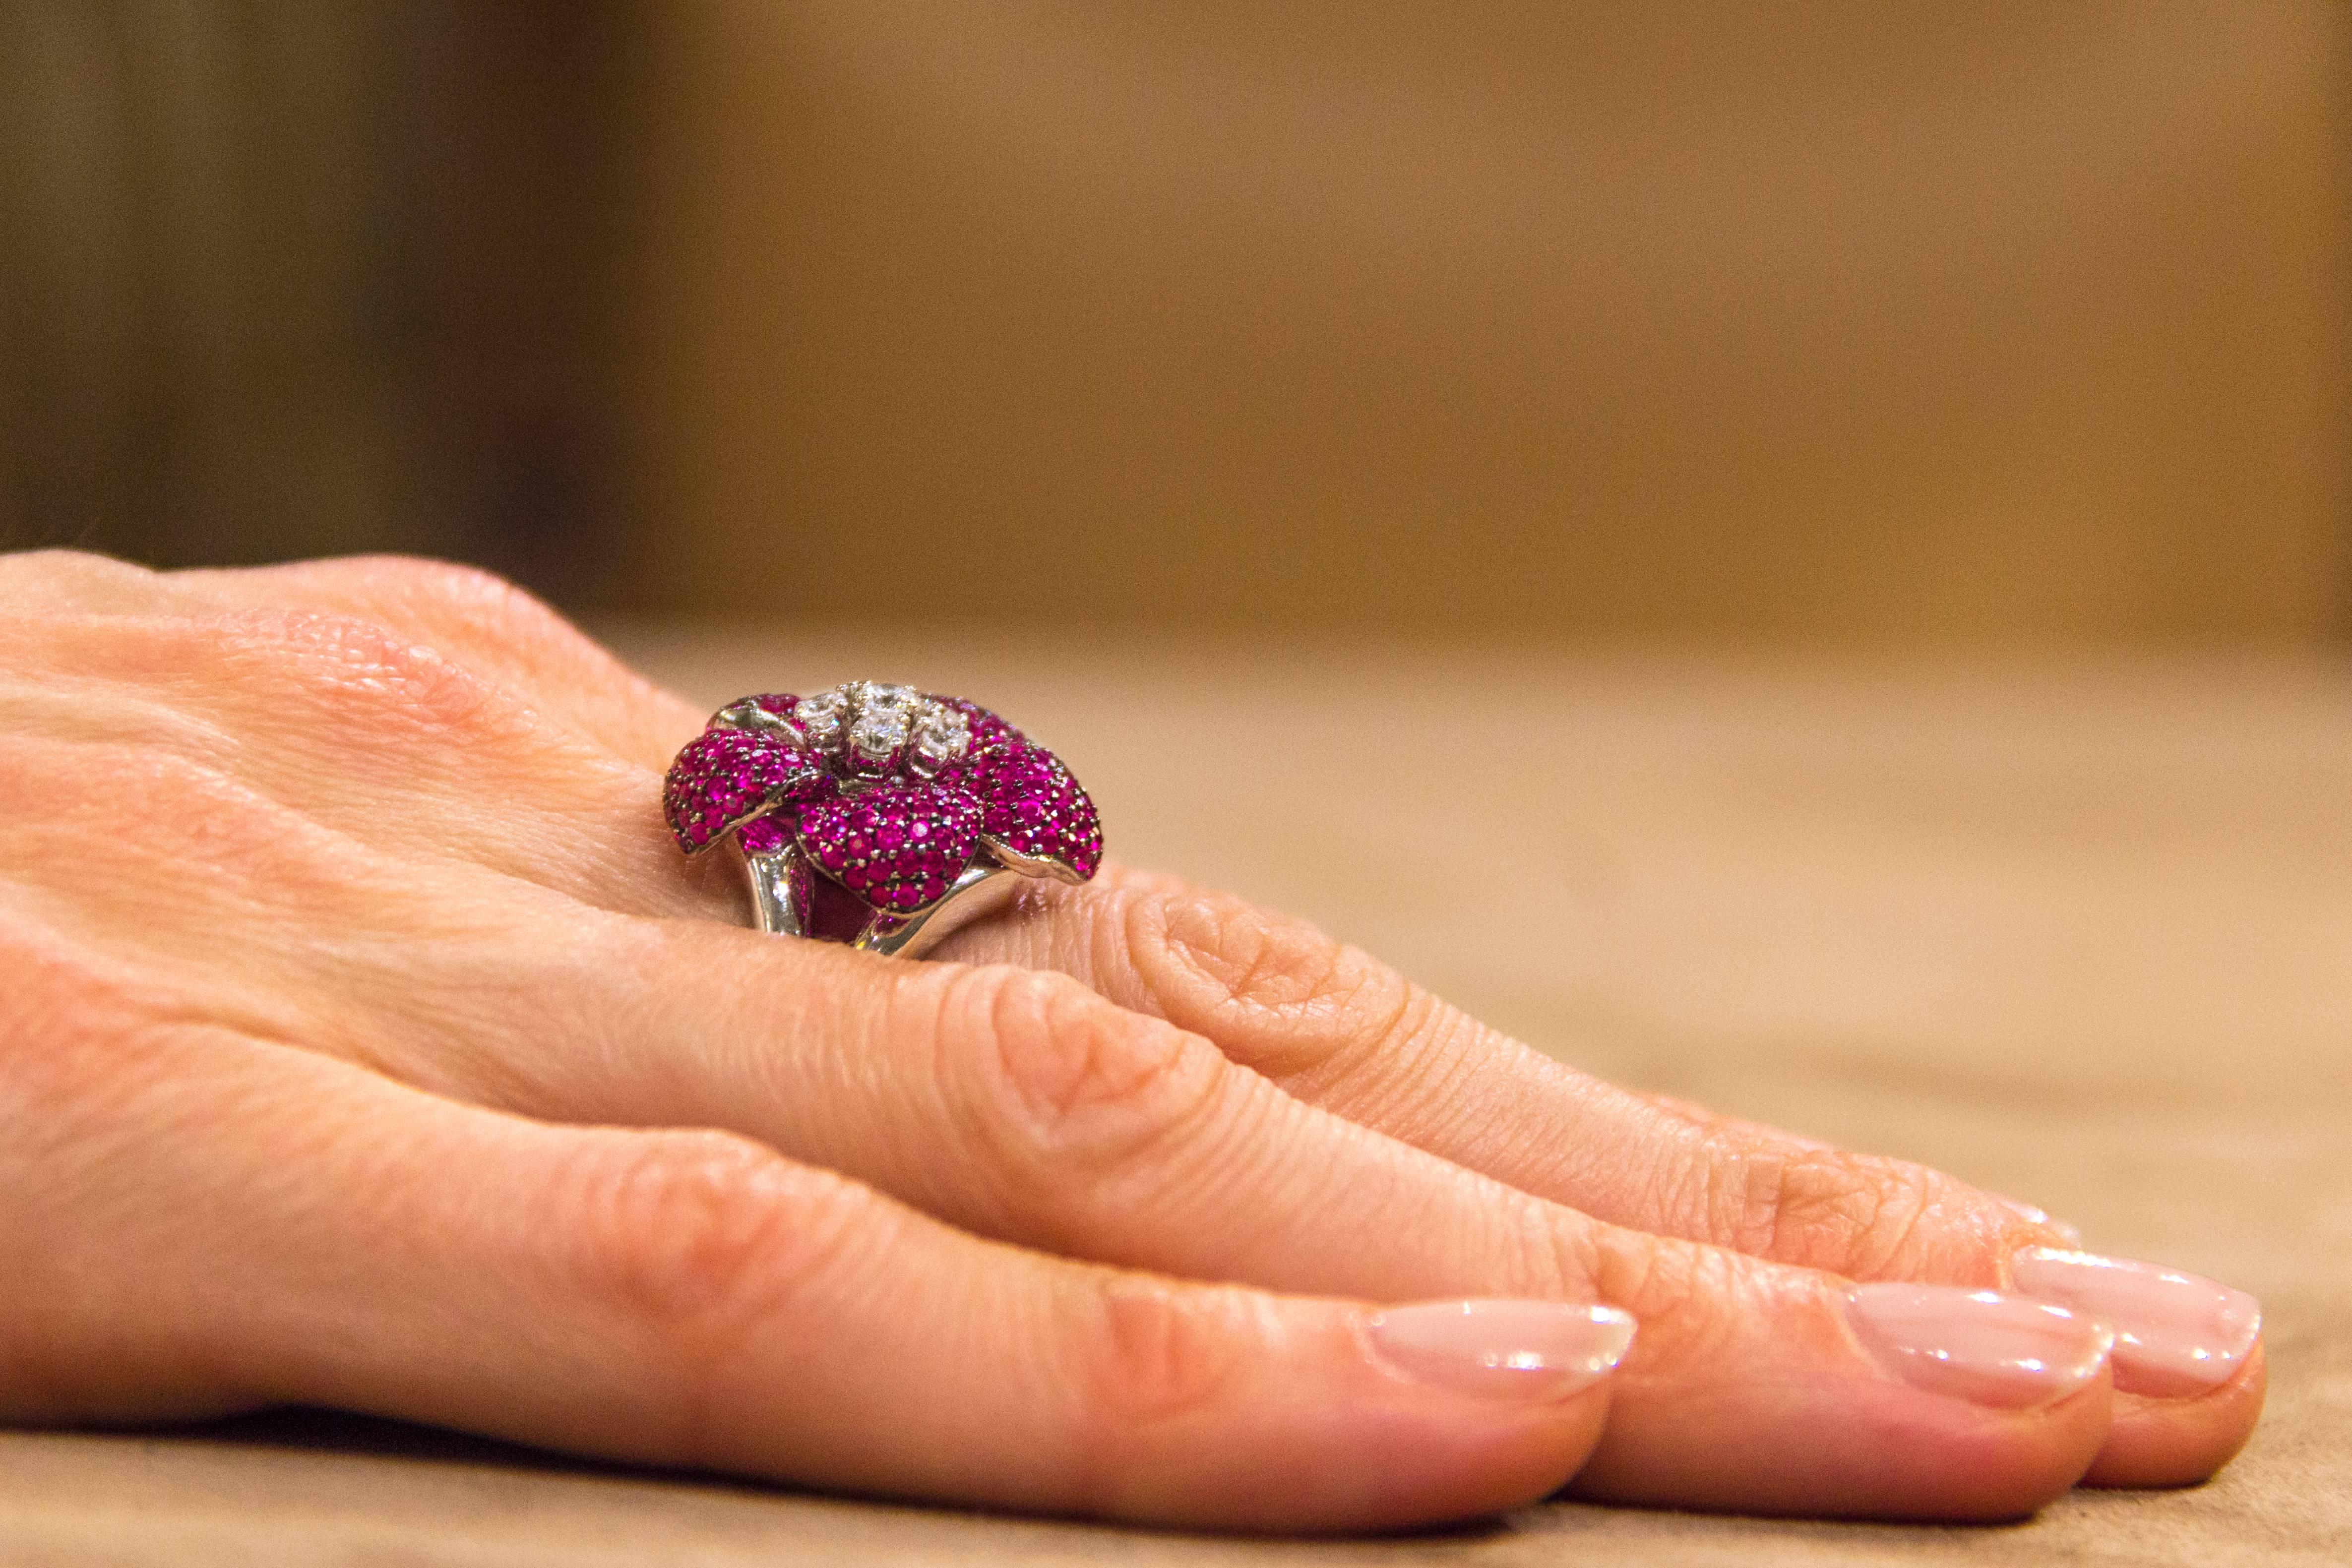 A dazzling flower ring made of 18k white gold with petals encrusted with beautiful ruby pavè with dark rhodium setting, surrounding six prong-set diamonds in the center.
This ring holds 0.61 carats of diamonds and 211 pieces,  3.56 carats of